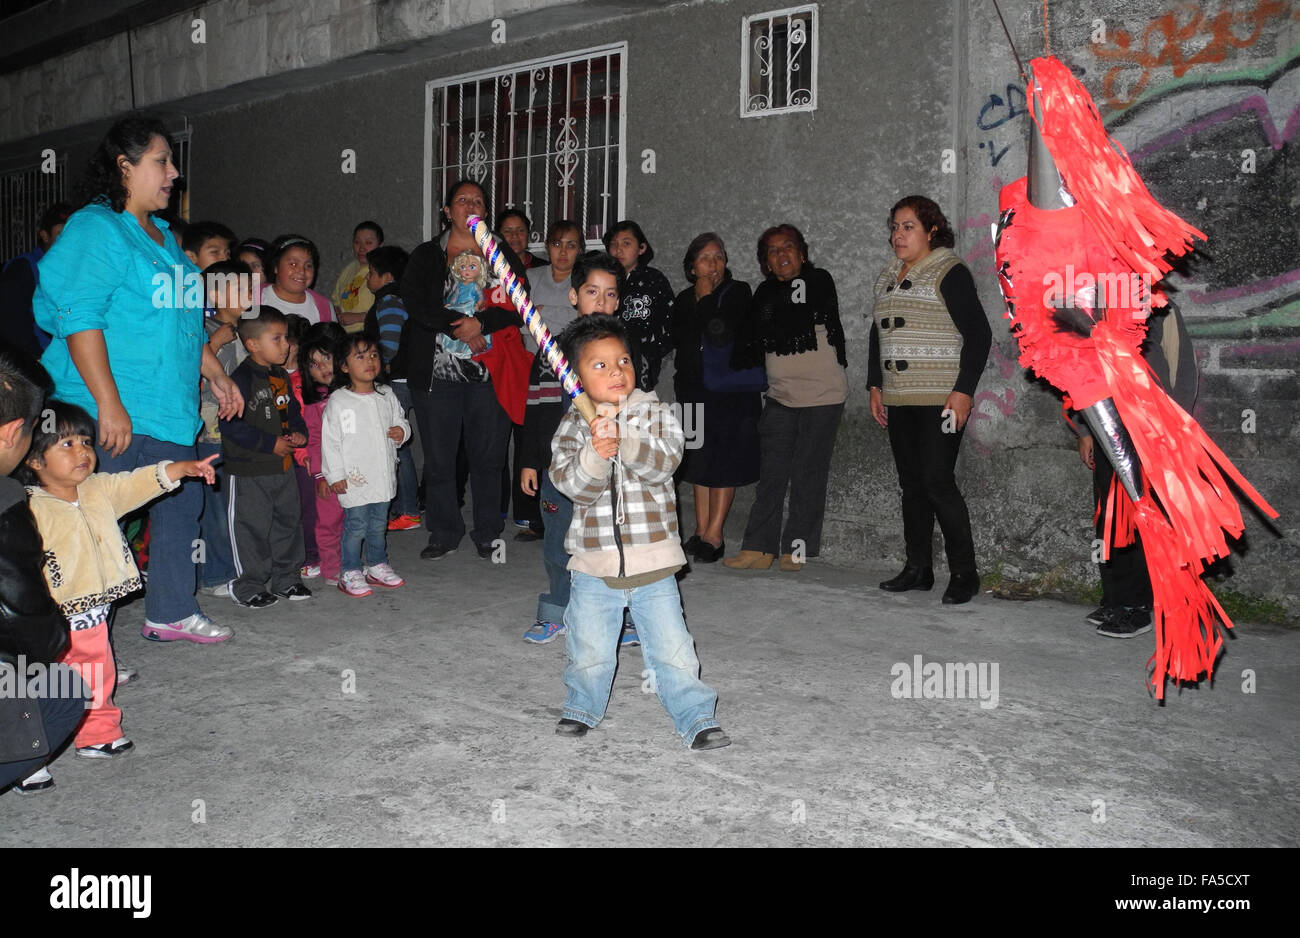 Mexico City, Mexico. 22nd Dec, 2014. Children hitting a pinata in the  Iztacalco district of Mexico City, Mexico, 22 December 2014. The cardboard  pinatas are filled with sweets. When they burst after